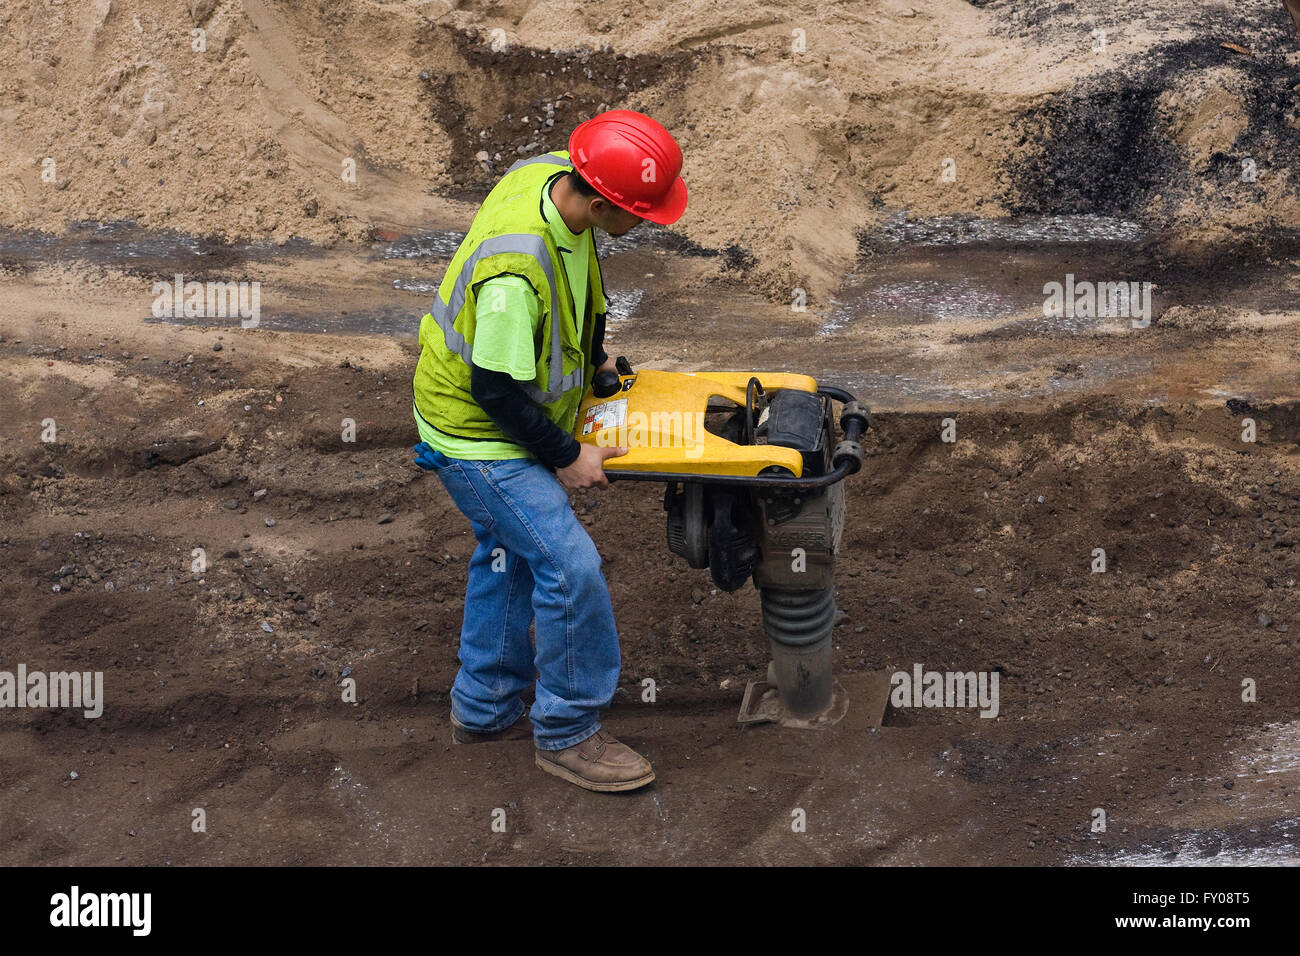 A Construction Worker operating a Wacker Neuson BS60-4S gas powered rammer tamping machine inside of a ditch dug into the street Stock Photo